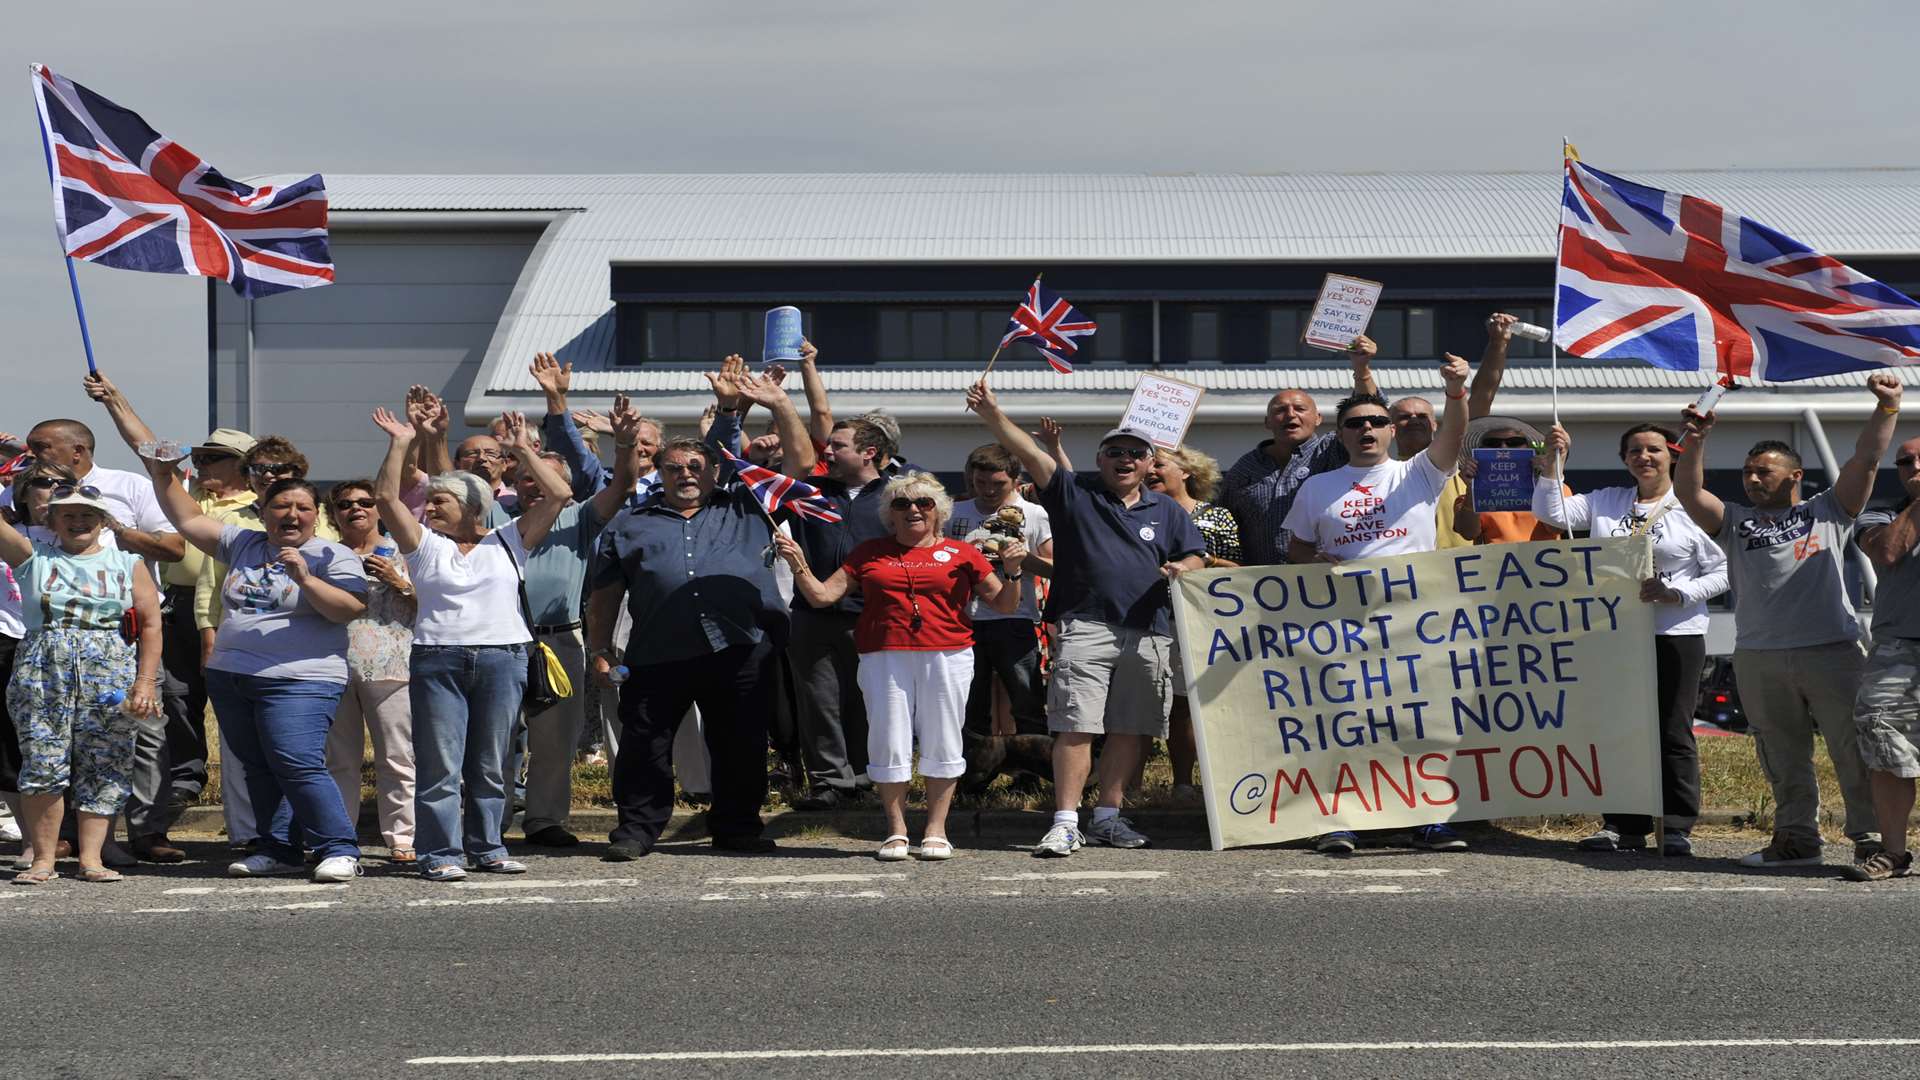 Many campaigners still want Manston to reopen as an airport